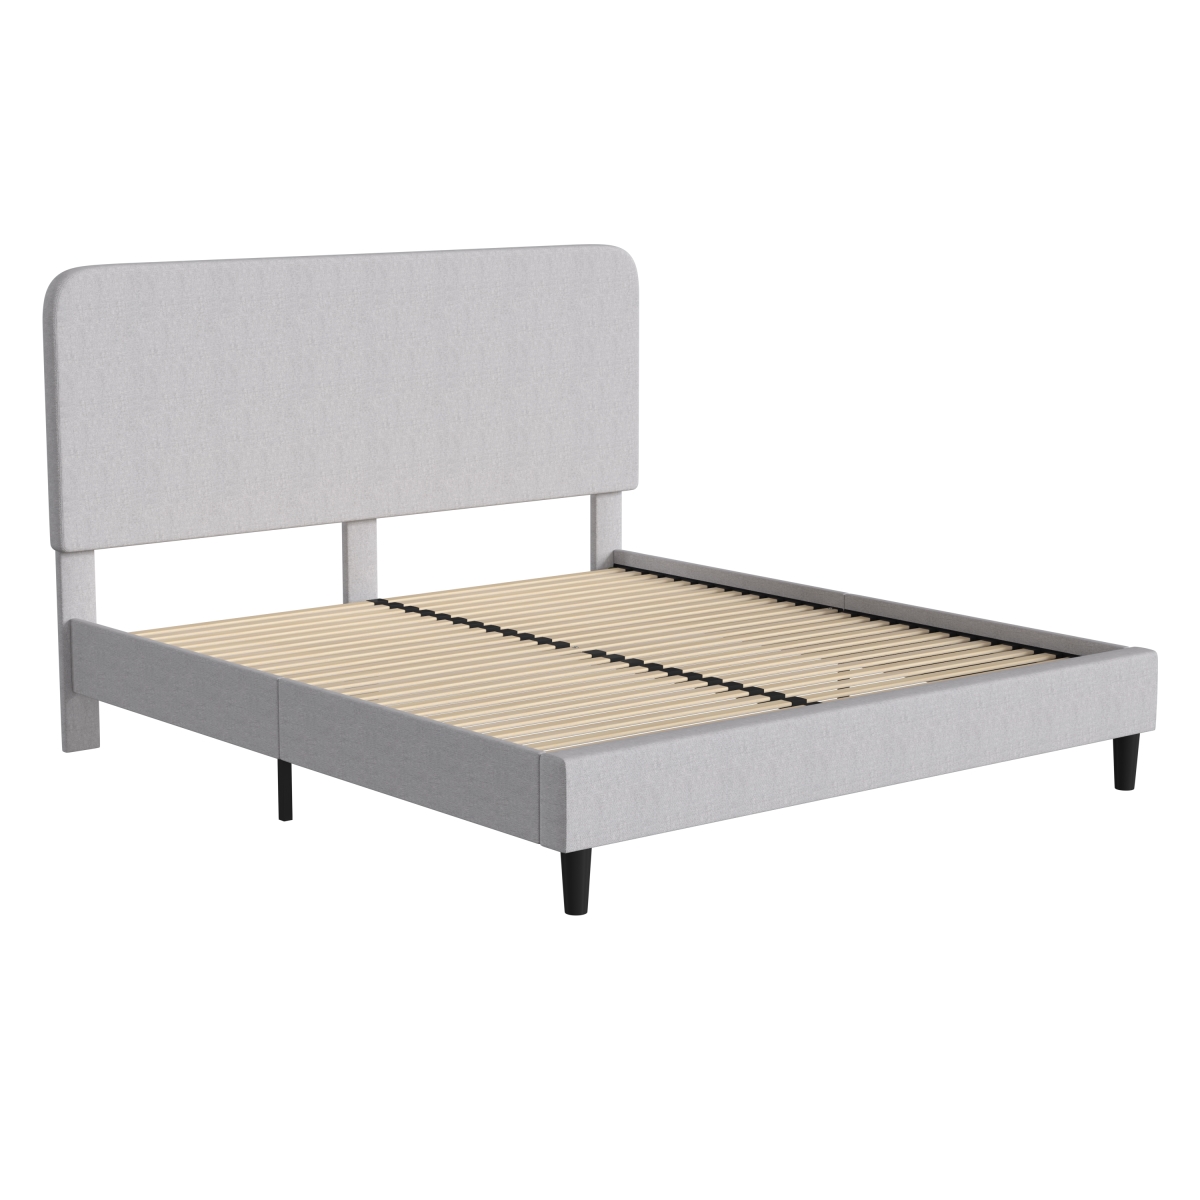 Flash Furniture HG-3WPB21-K04-K-GY-GG Addison Light Grey King Fabric Upholstered Platform Bed Headboard with Rounded Edges - No Box Spring or Fo